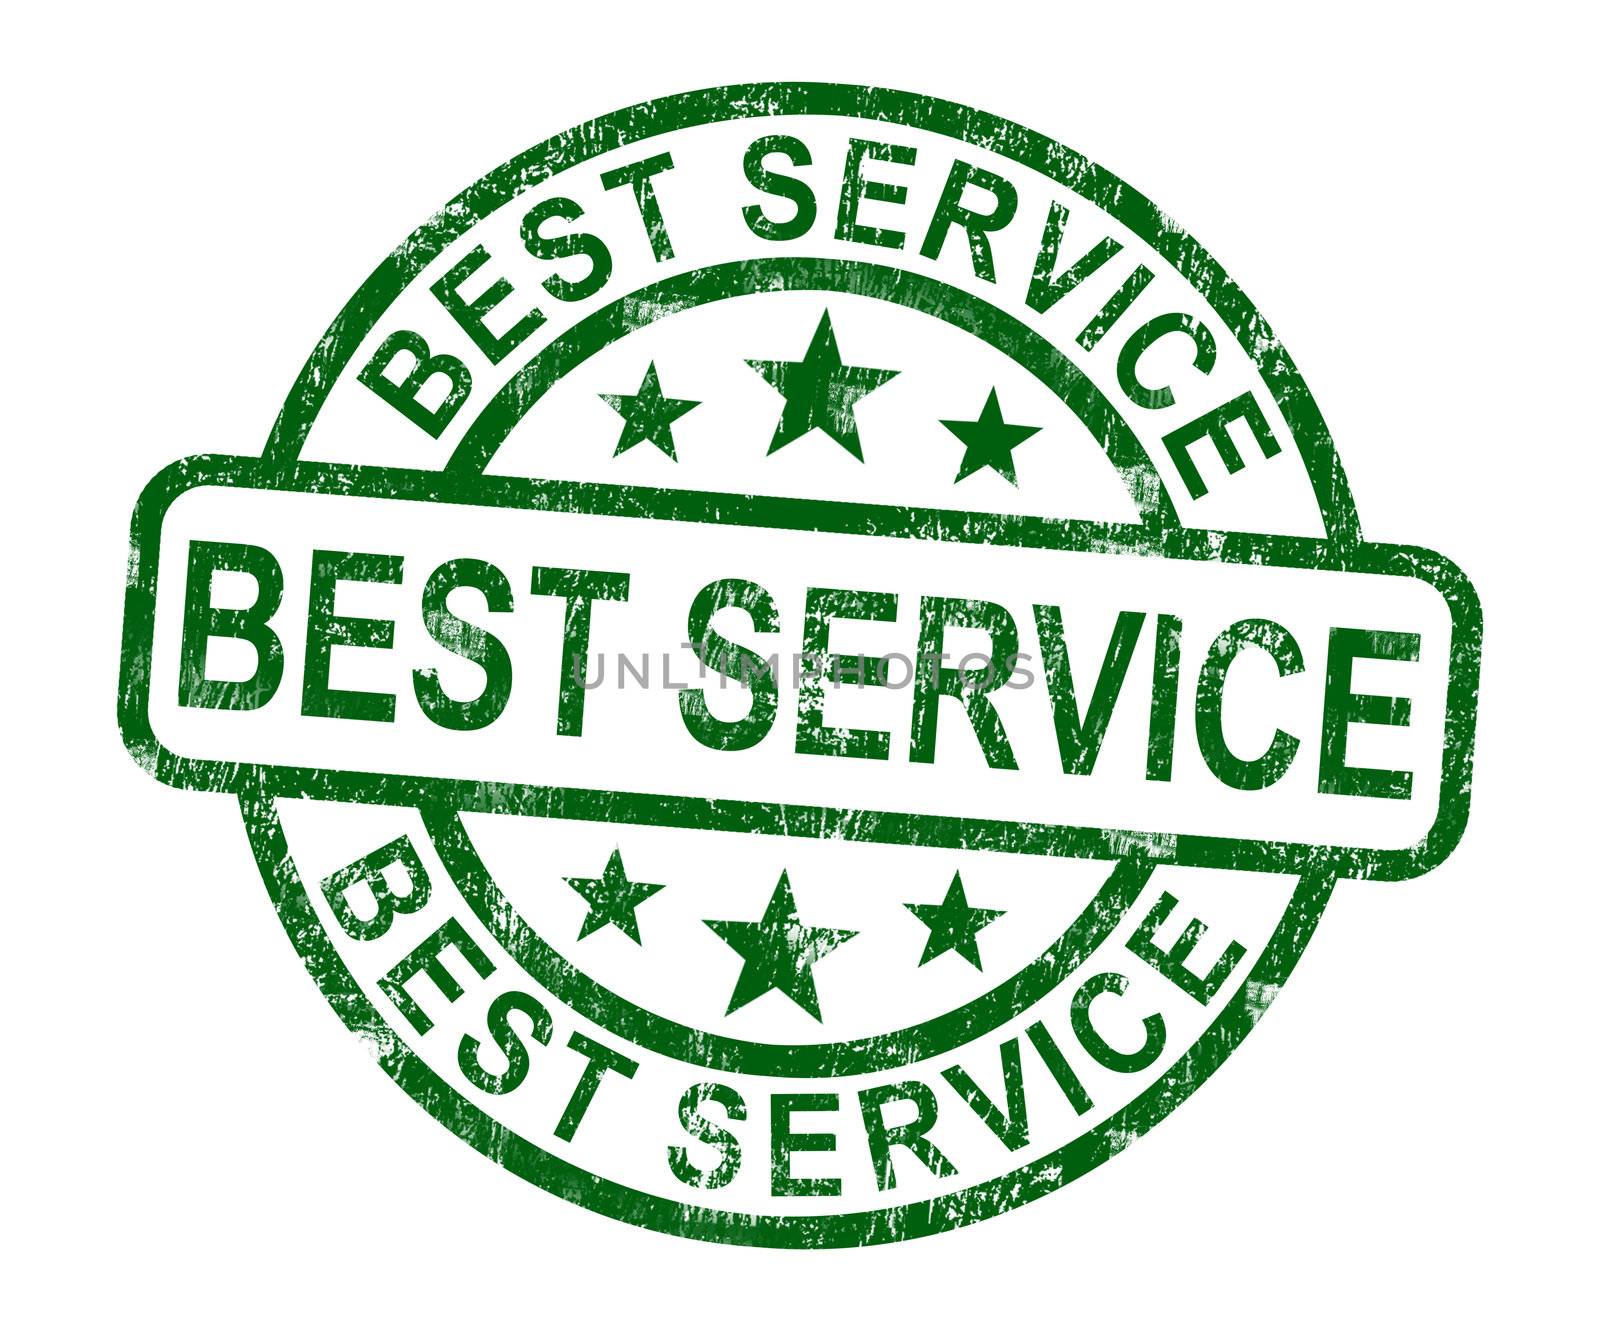 Best Service Stamp Shows Top Customer Assistance by stuartmiles